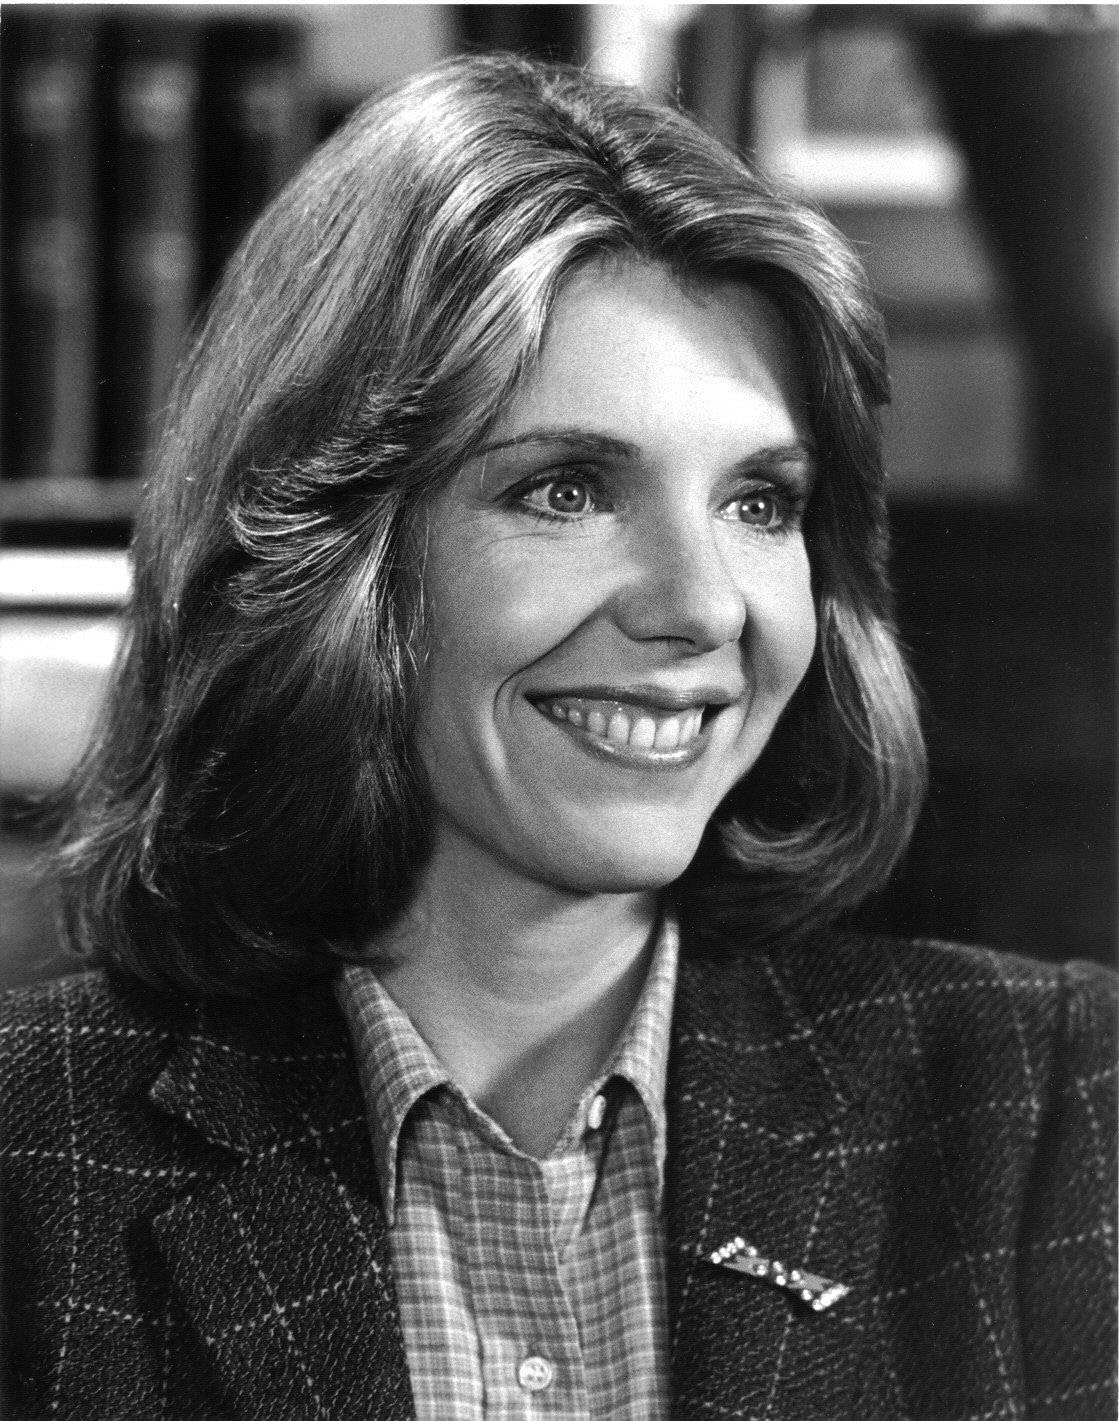 8 x 10 black and white photo of Jill Clayburgh by LuismosGirl.